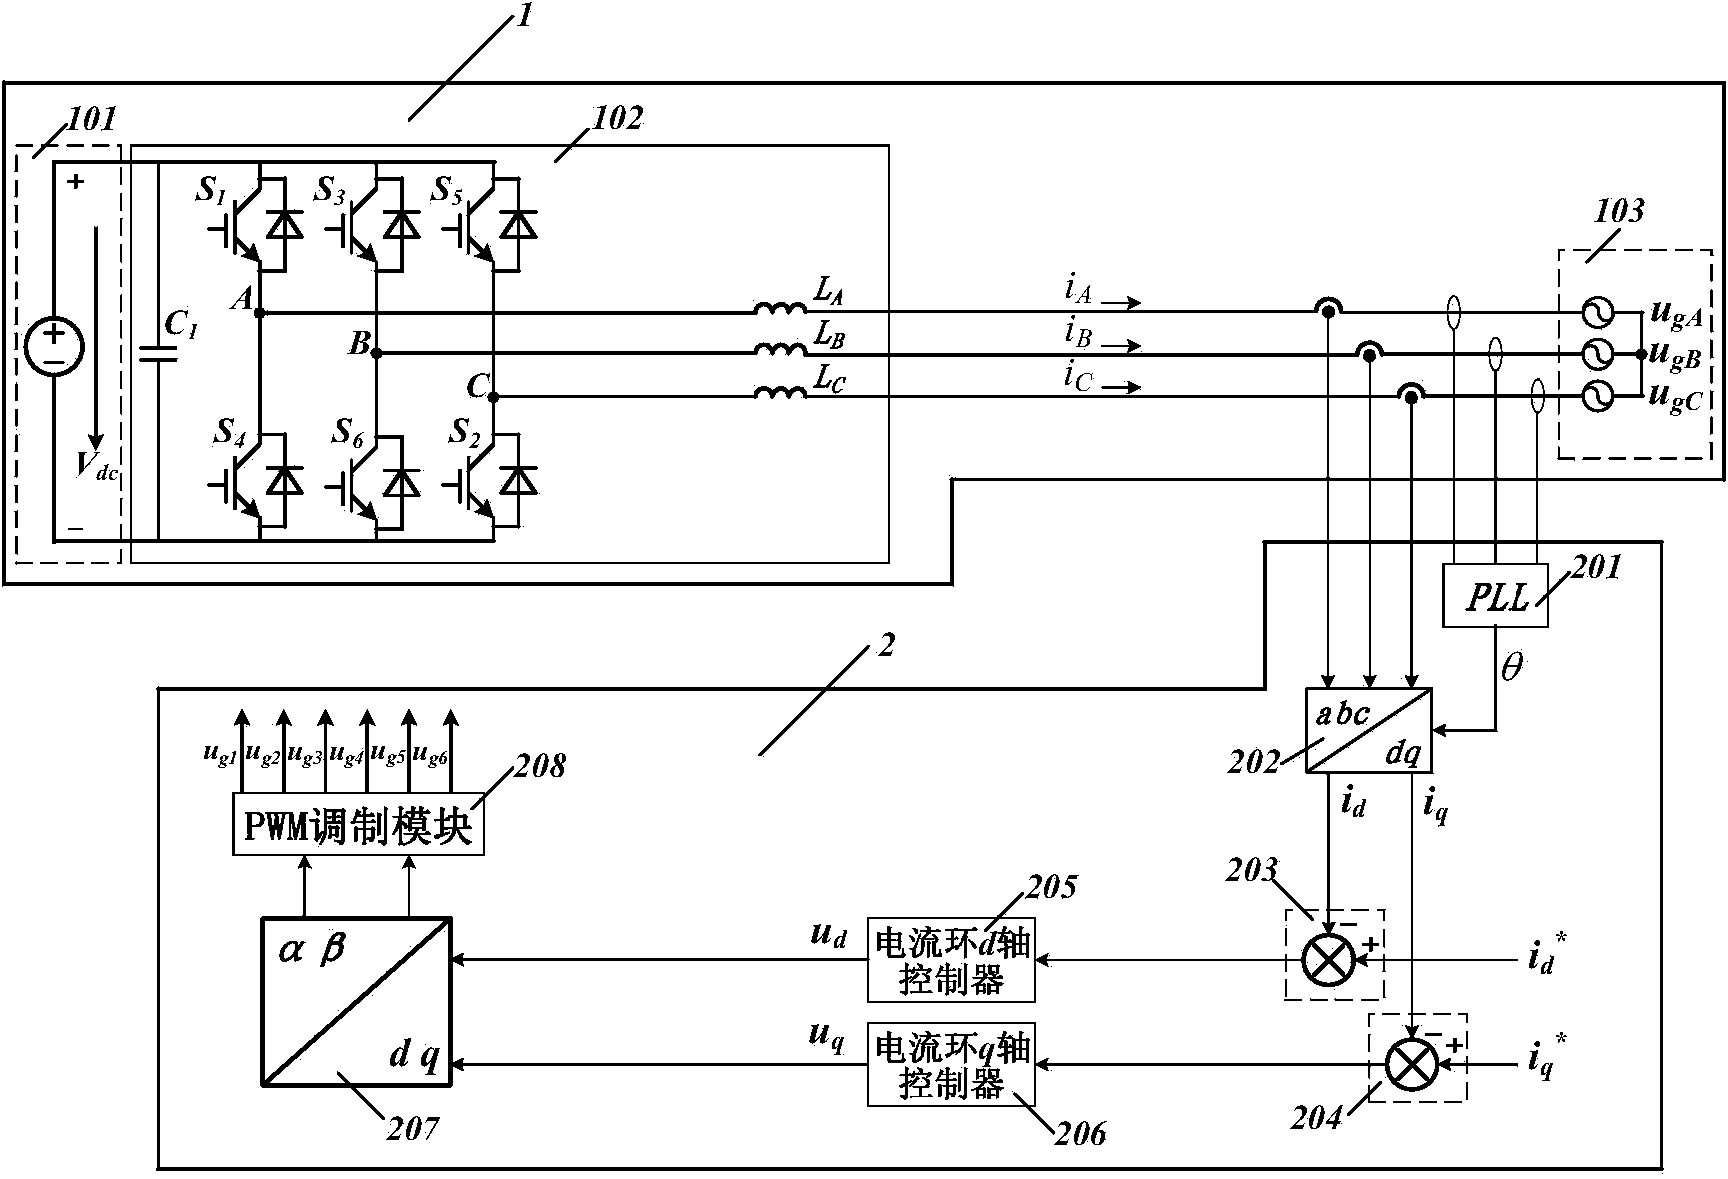 Control device of three-phase photovoltaic grid-connected inverter